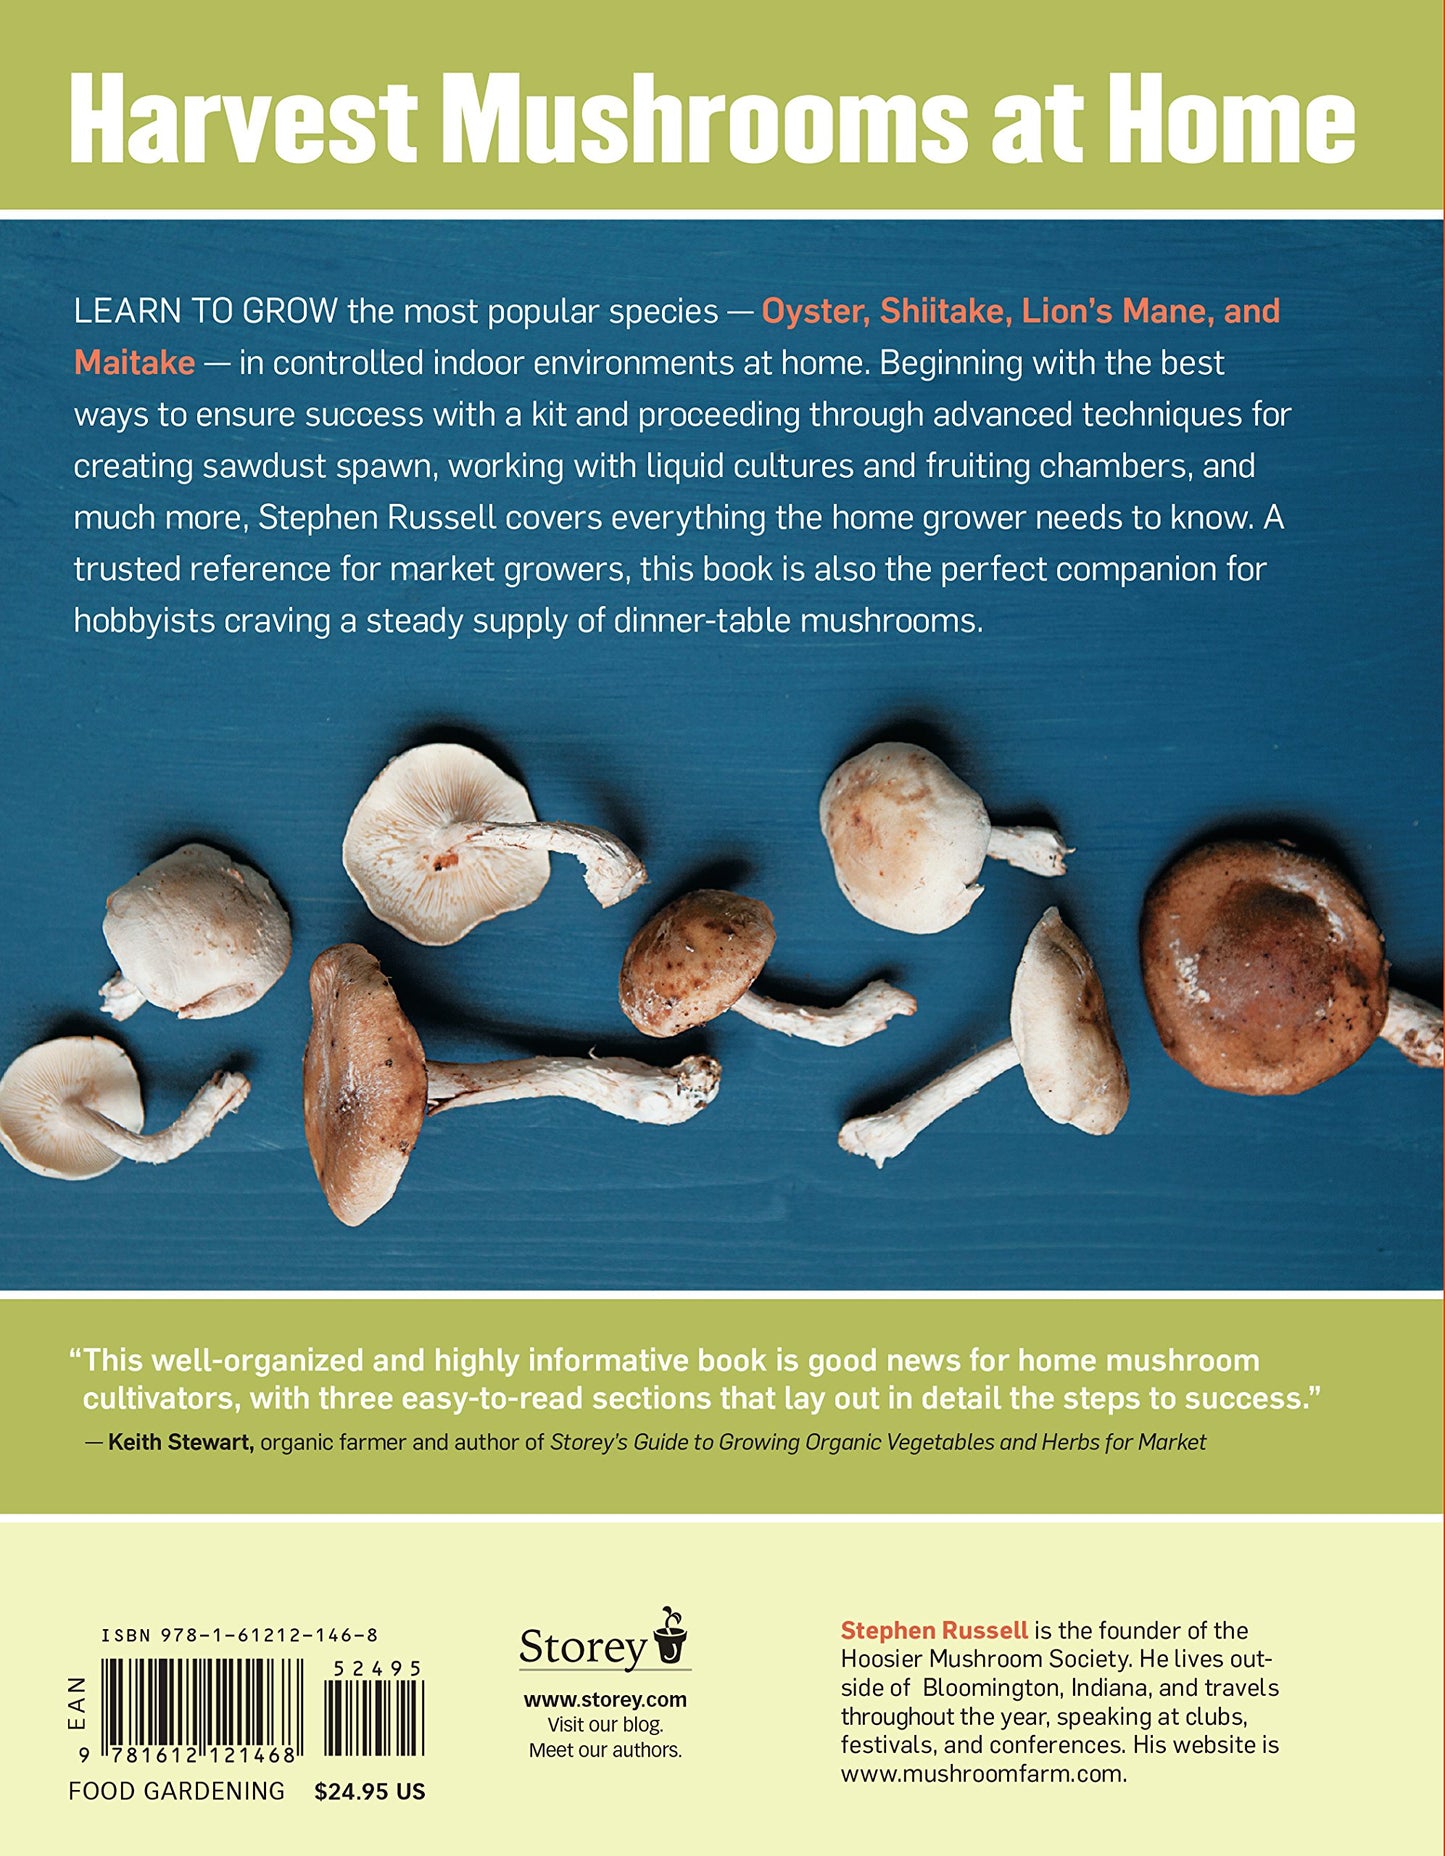 The Essential Guide to Cultivating Mushrooms by Stephen Russell